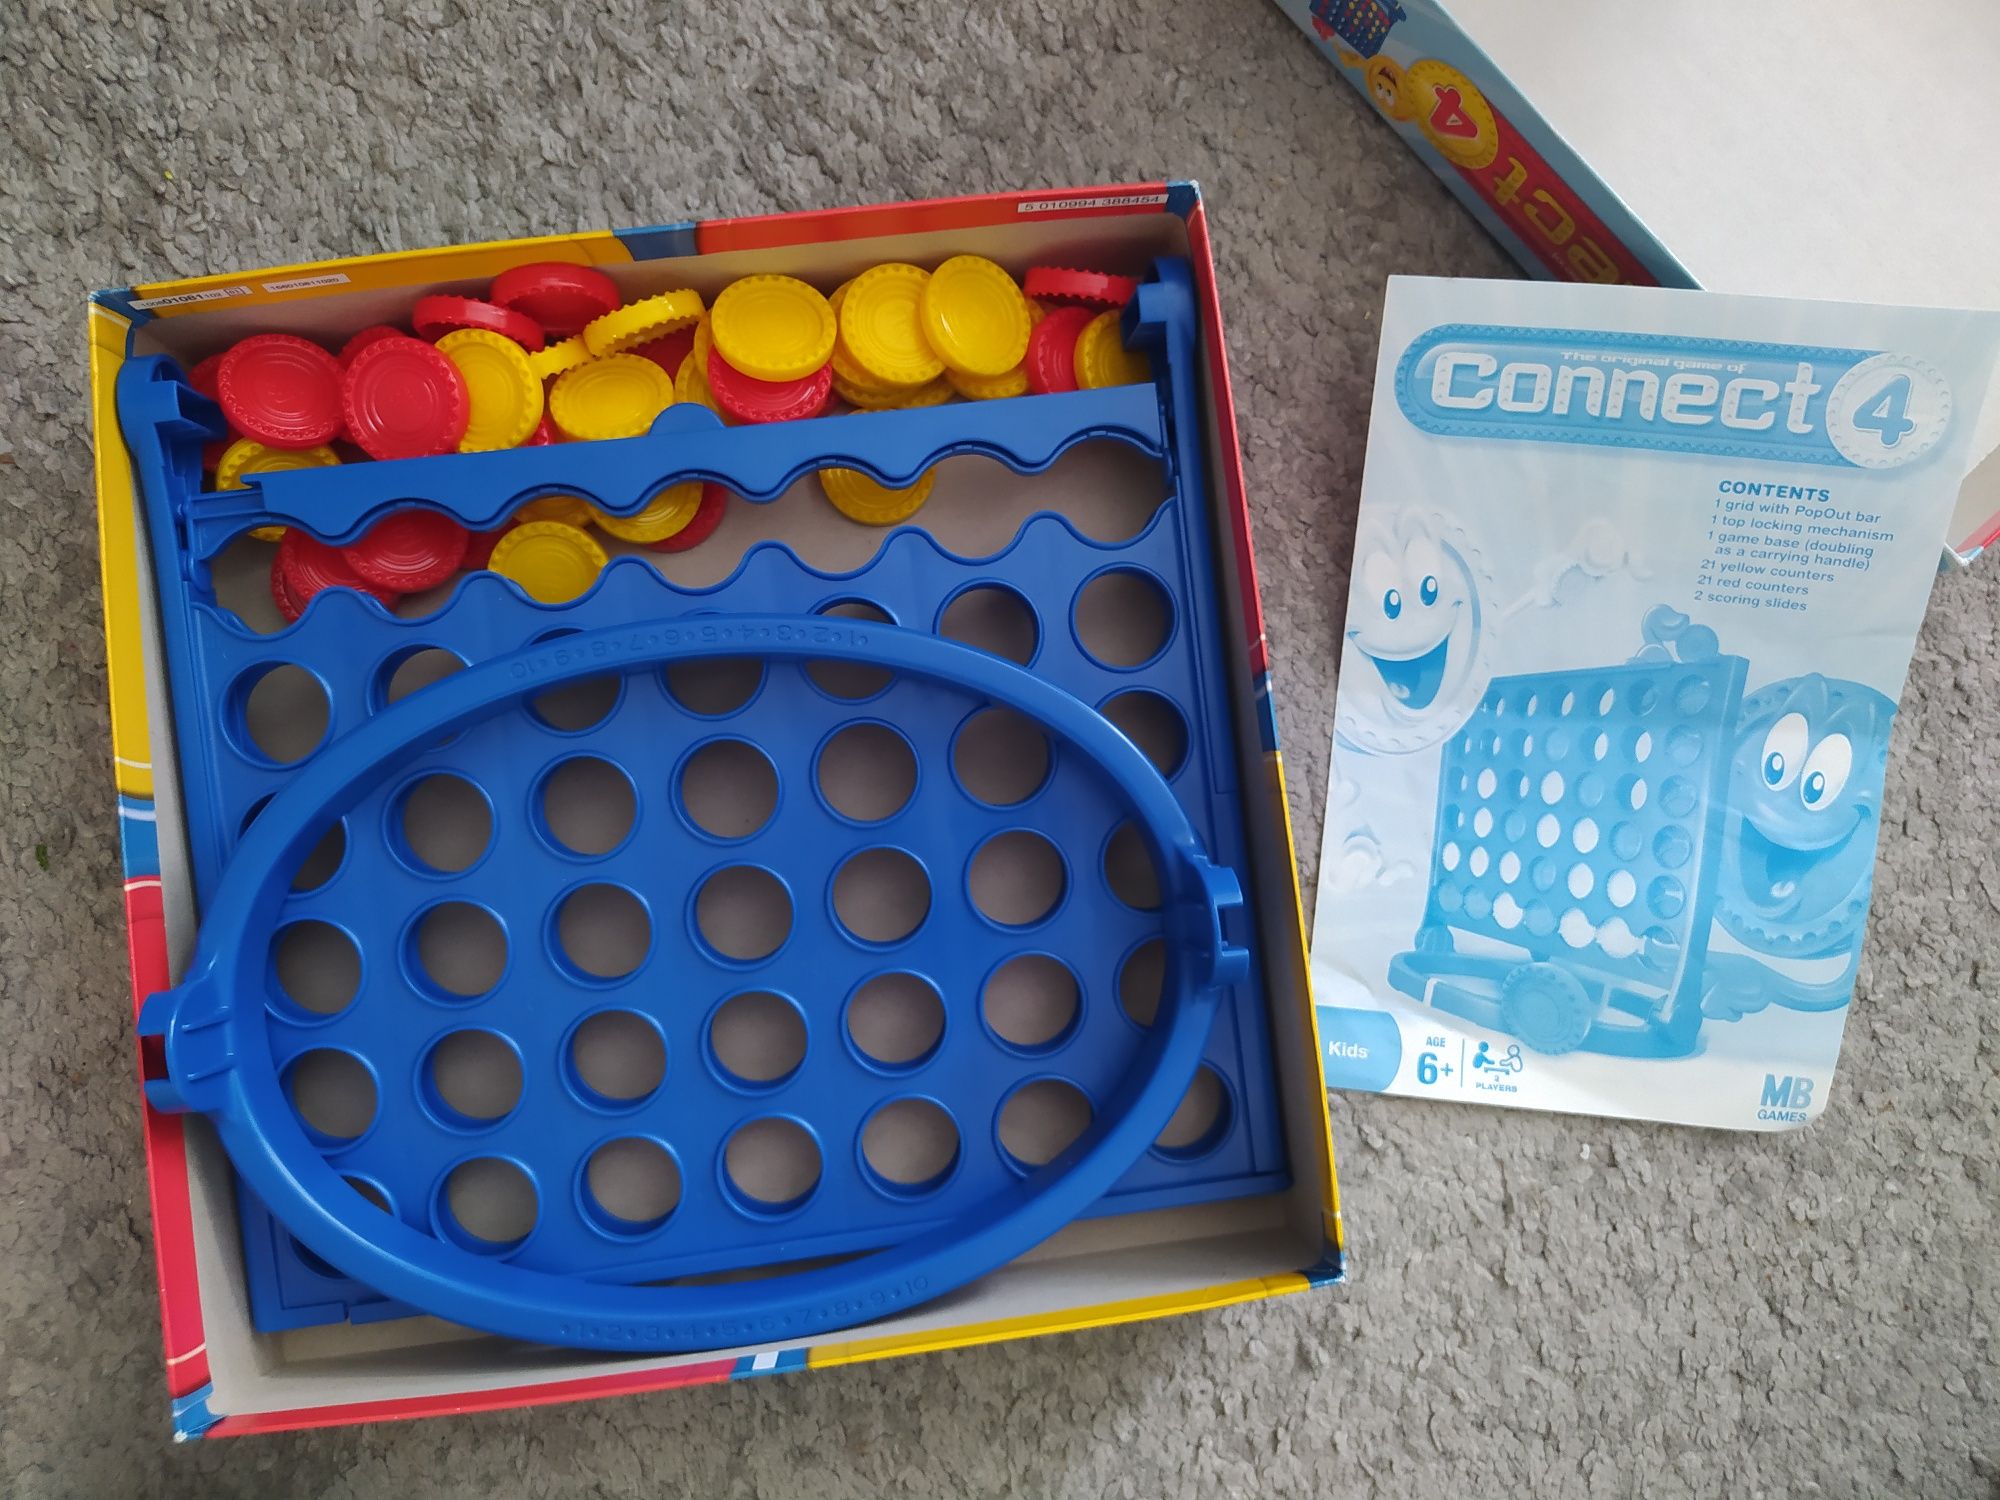 The original game of Connect 6+ od Hasbro